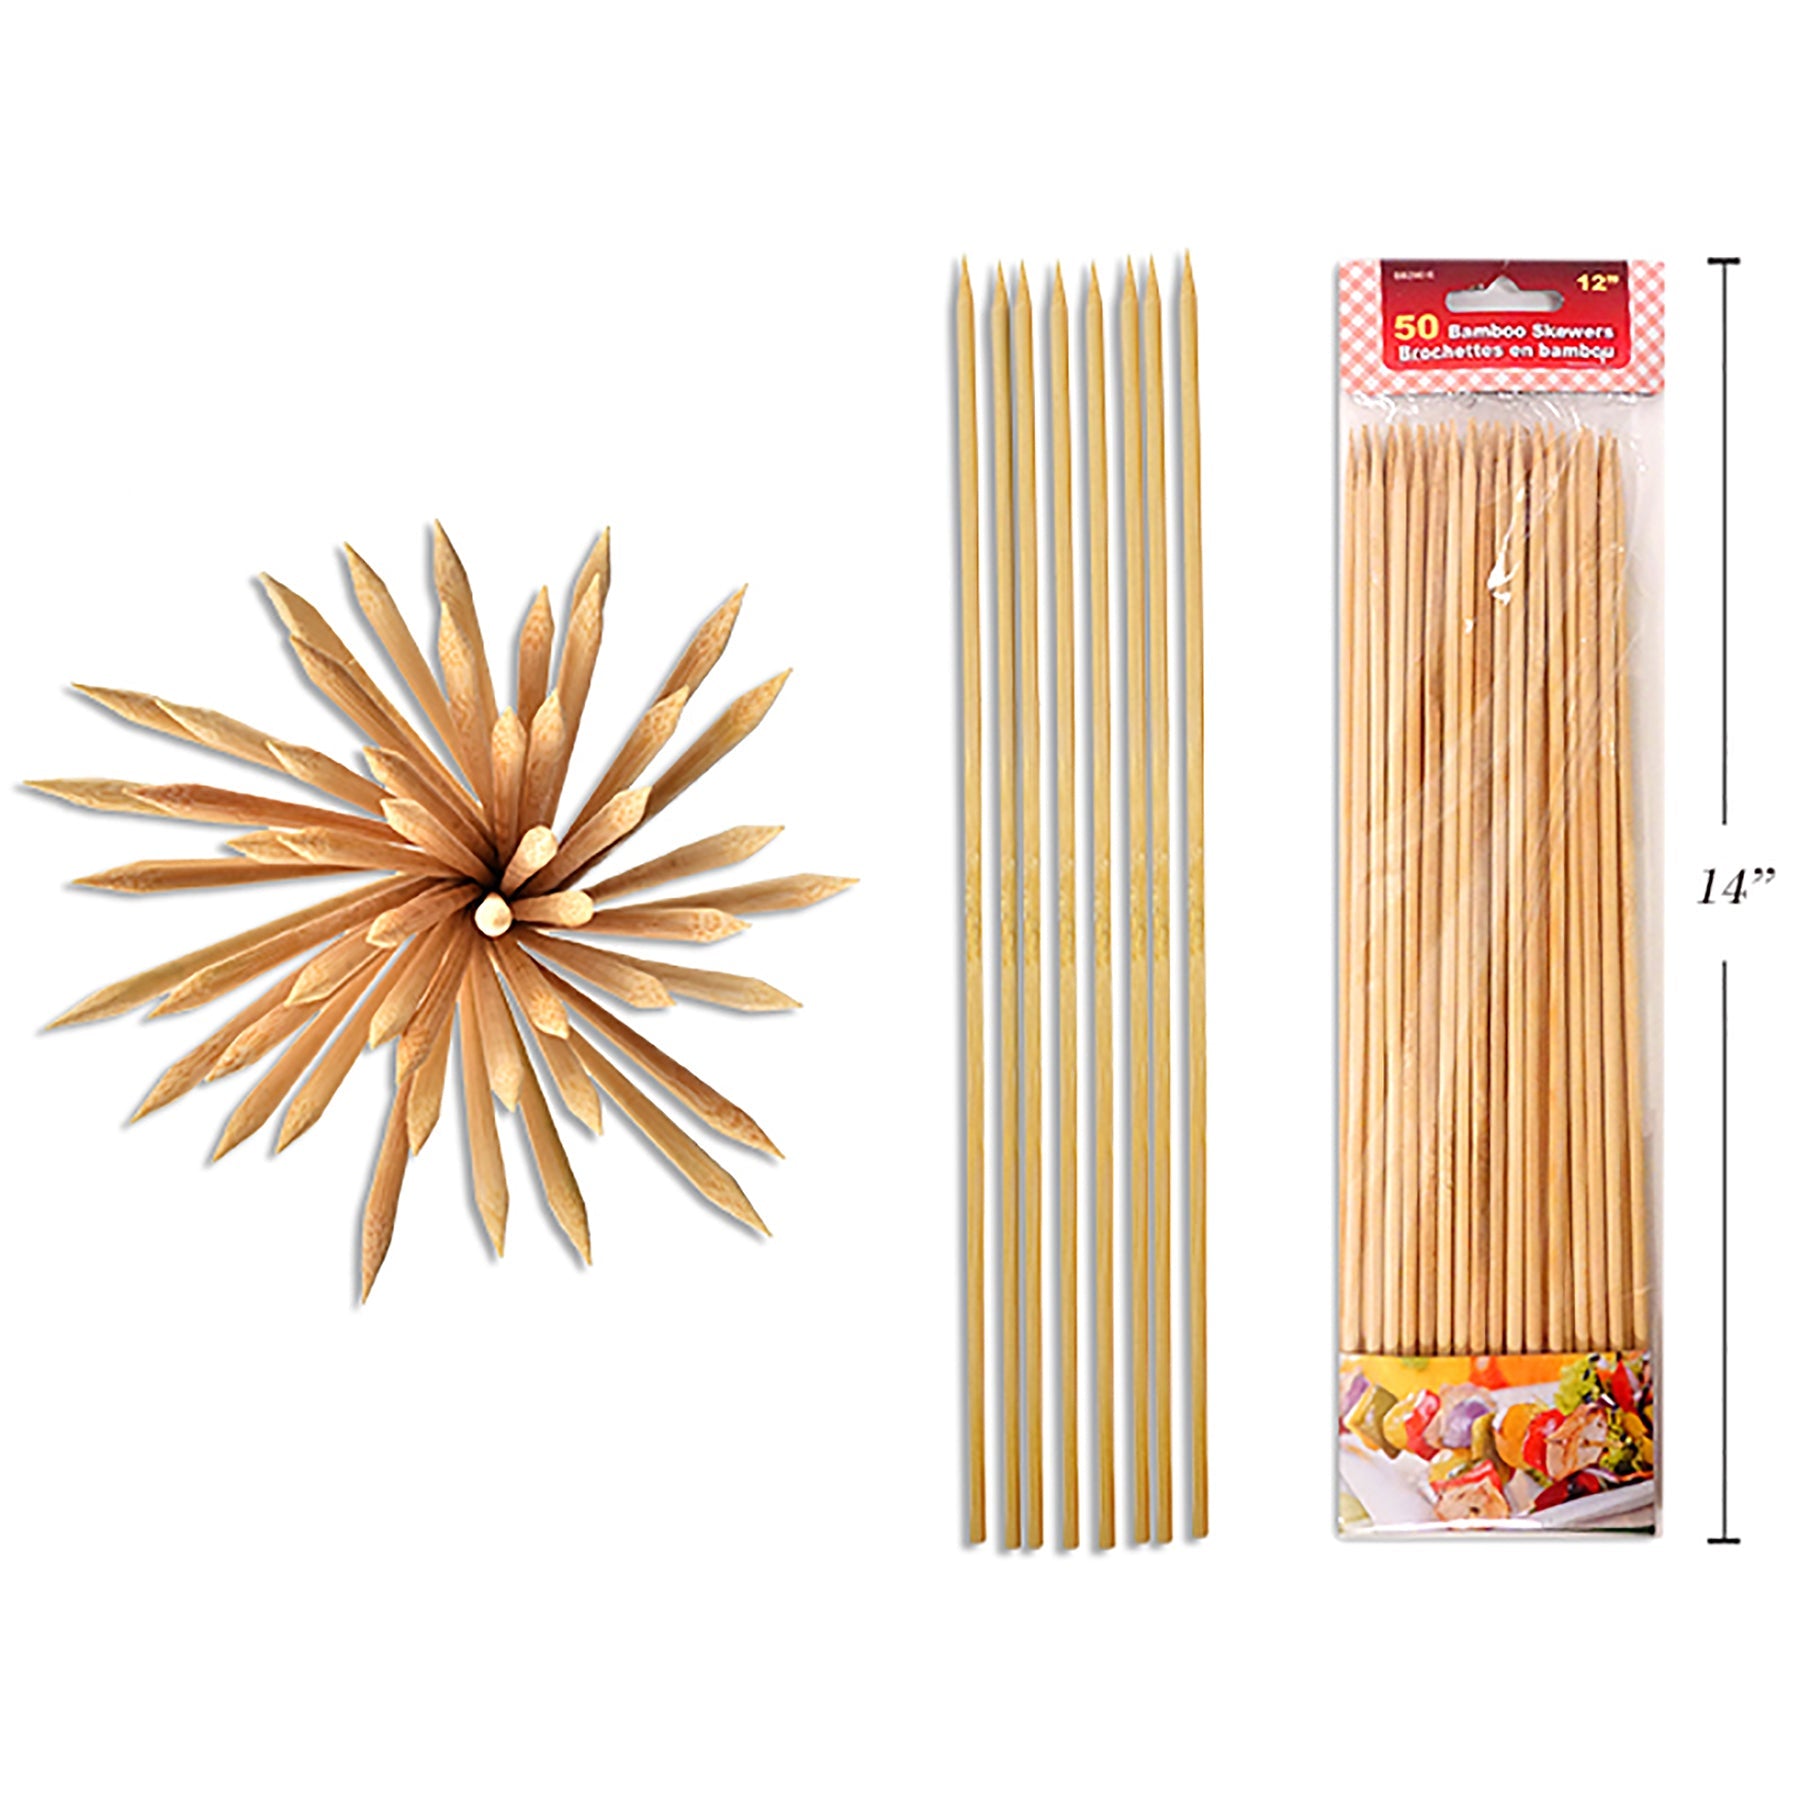 BBQ 50 Bamboo Skewers 12in